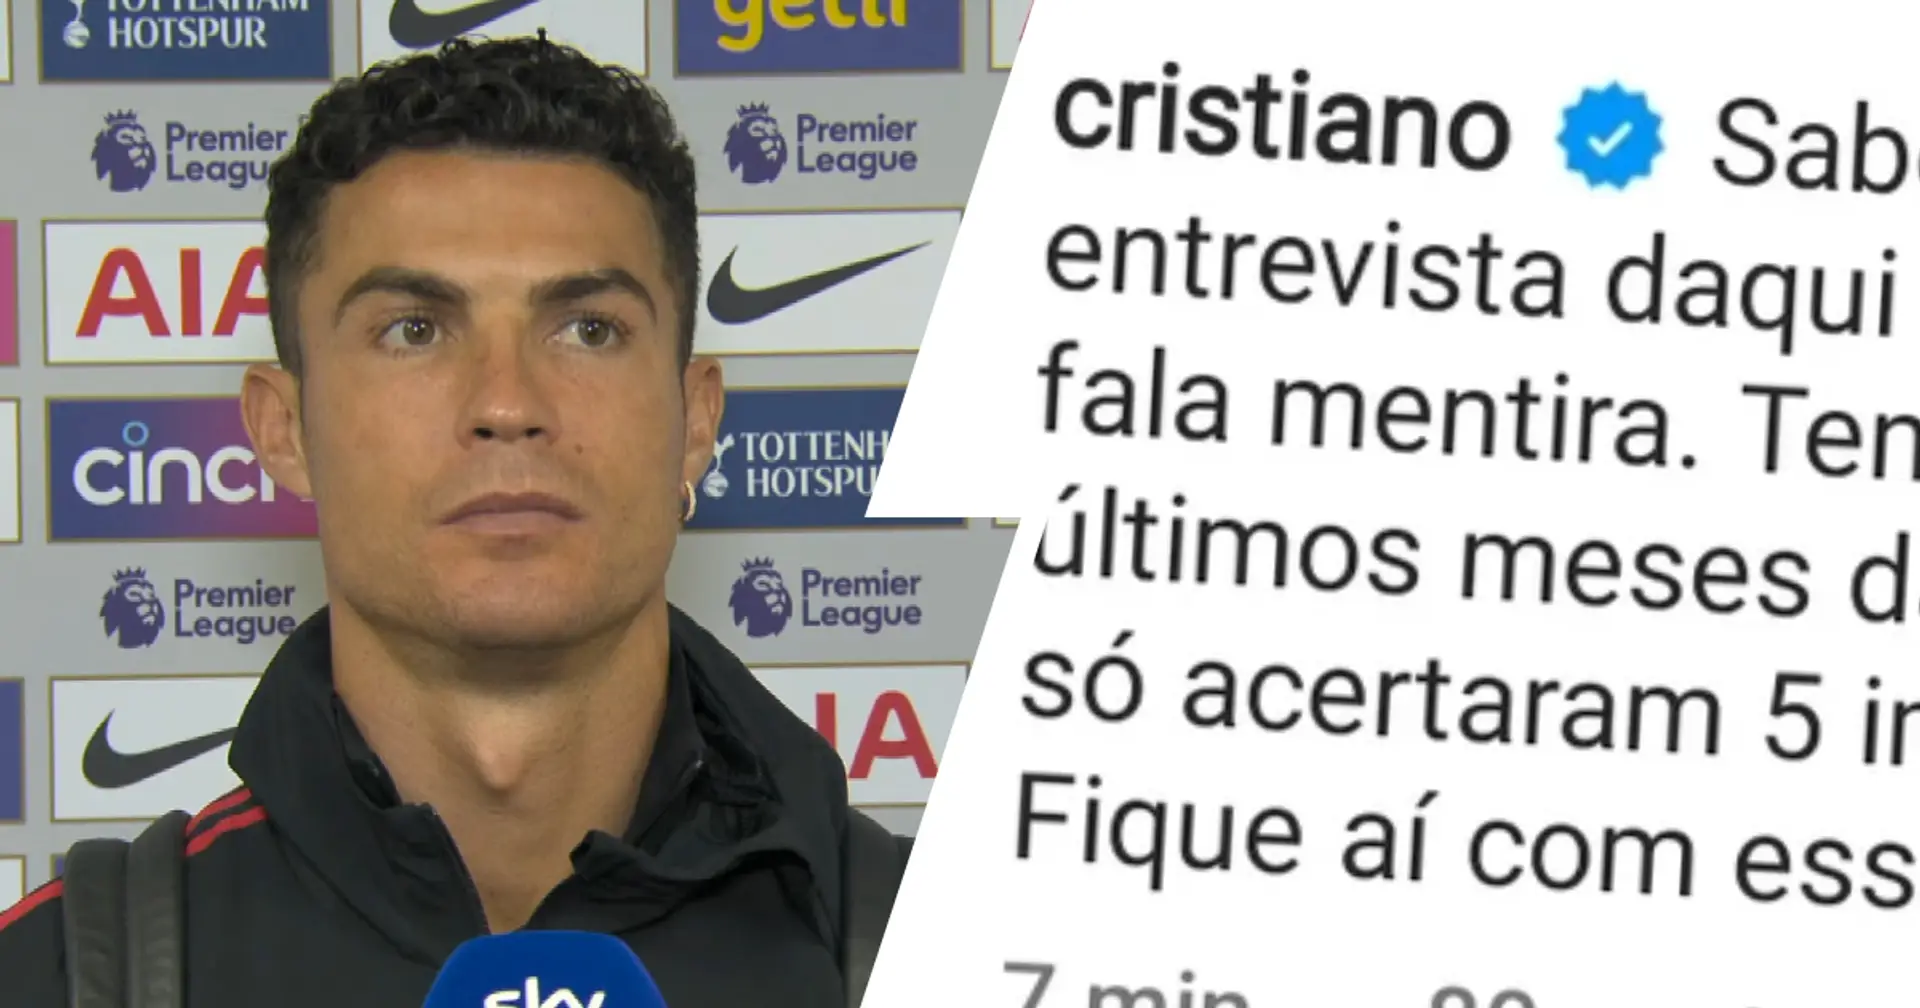 Cristiano Ronaldo: 'Out of 100 stories, media only got 5 right. They'll know truth in a few weeks'